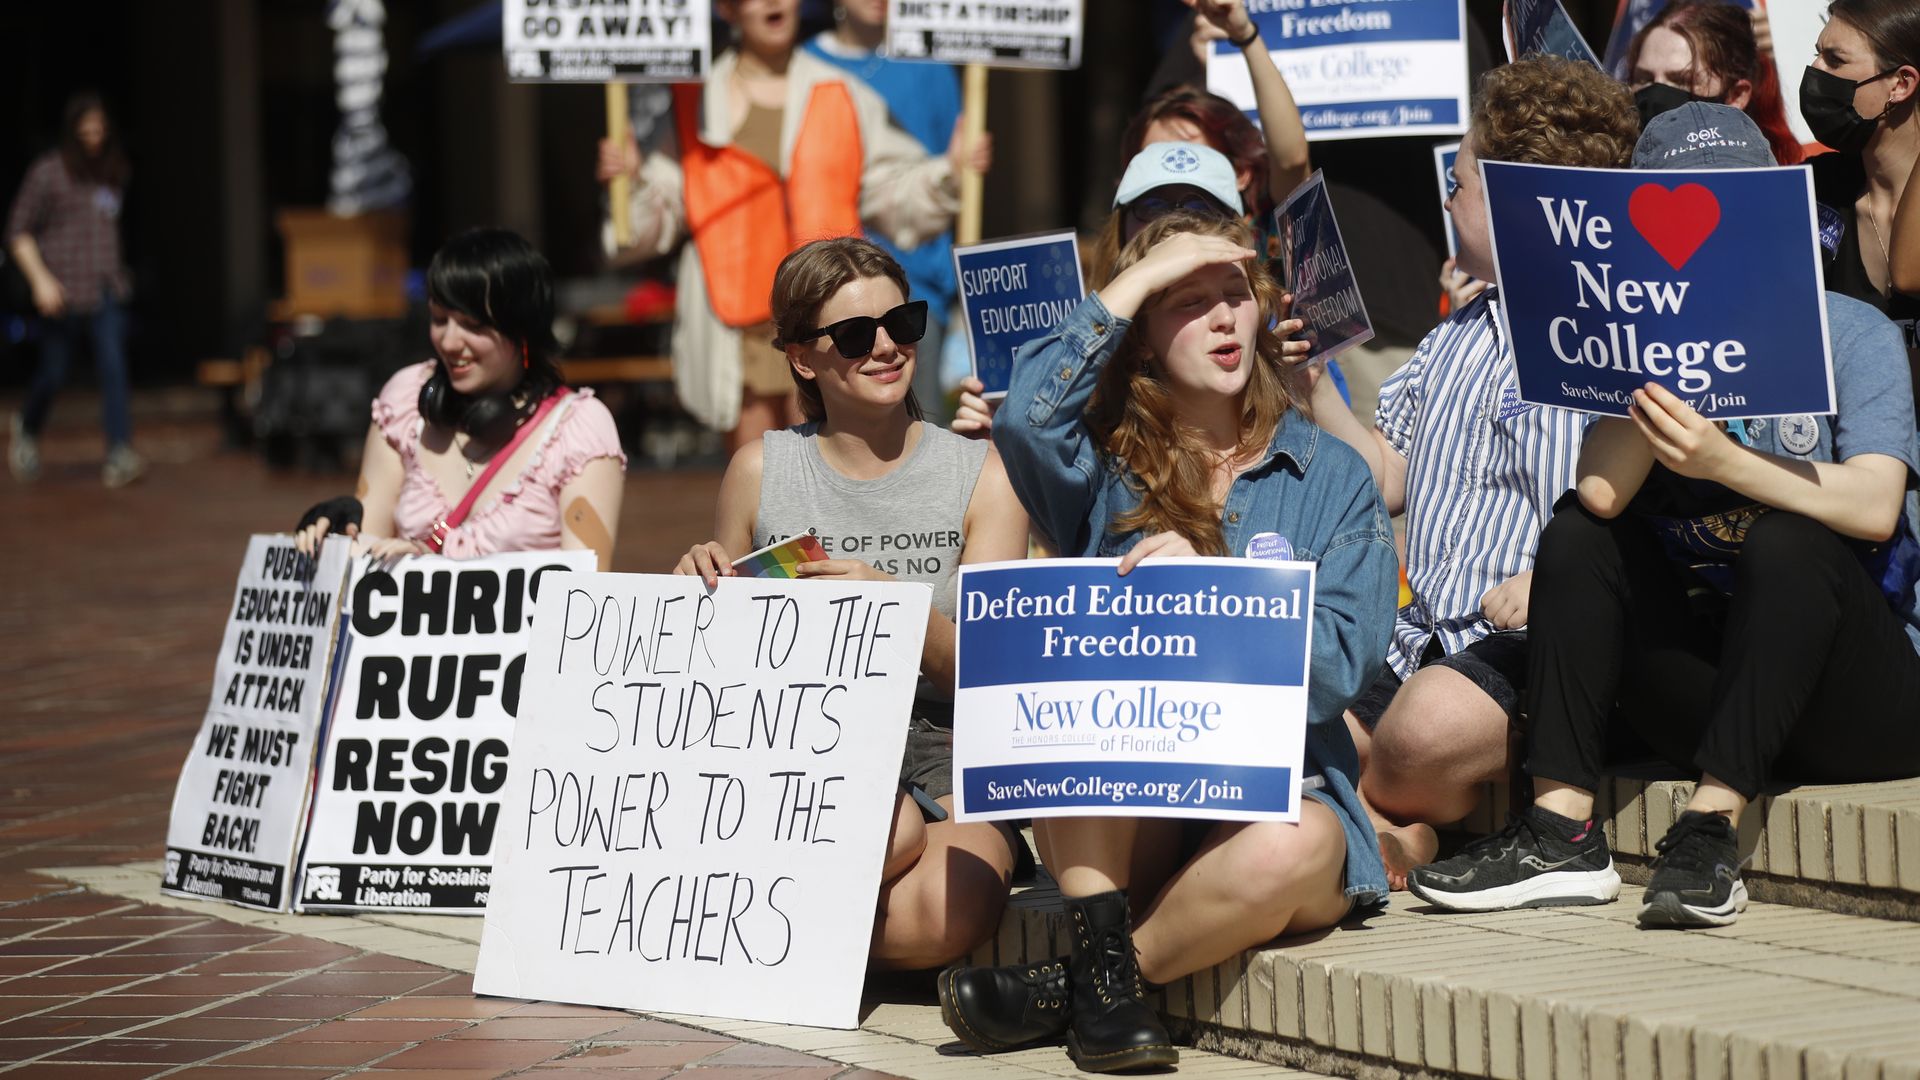 Supporters of New College of Florida sit on a curb holding protest signs. Among the sign messages: "POWER TO THE STUDENTS POWER TO THE TEACHERS," "Defend Educational Freedom," "CHRIS RUFO RESIGN NOW" and "We <3 New College."